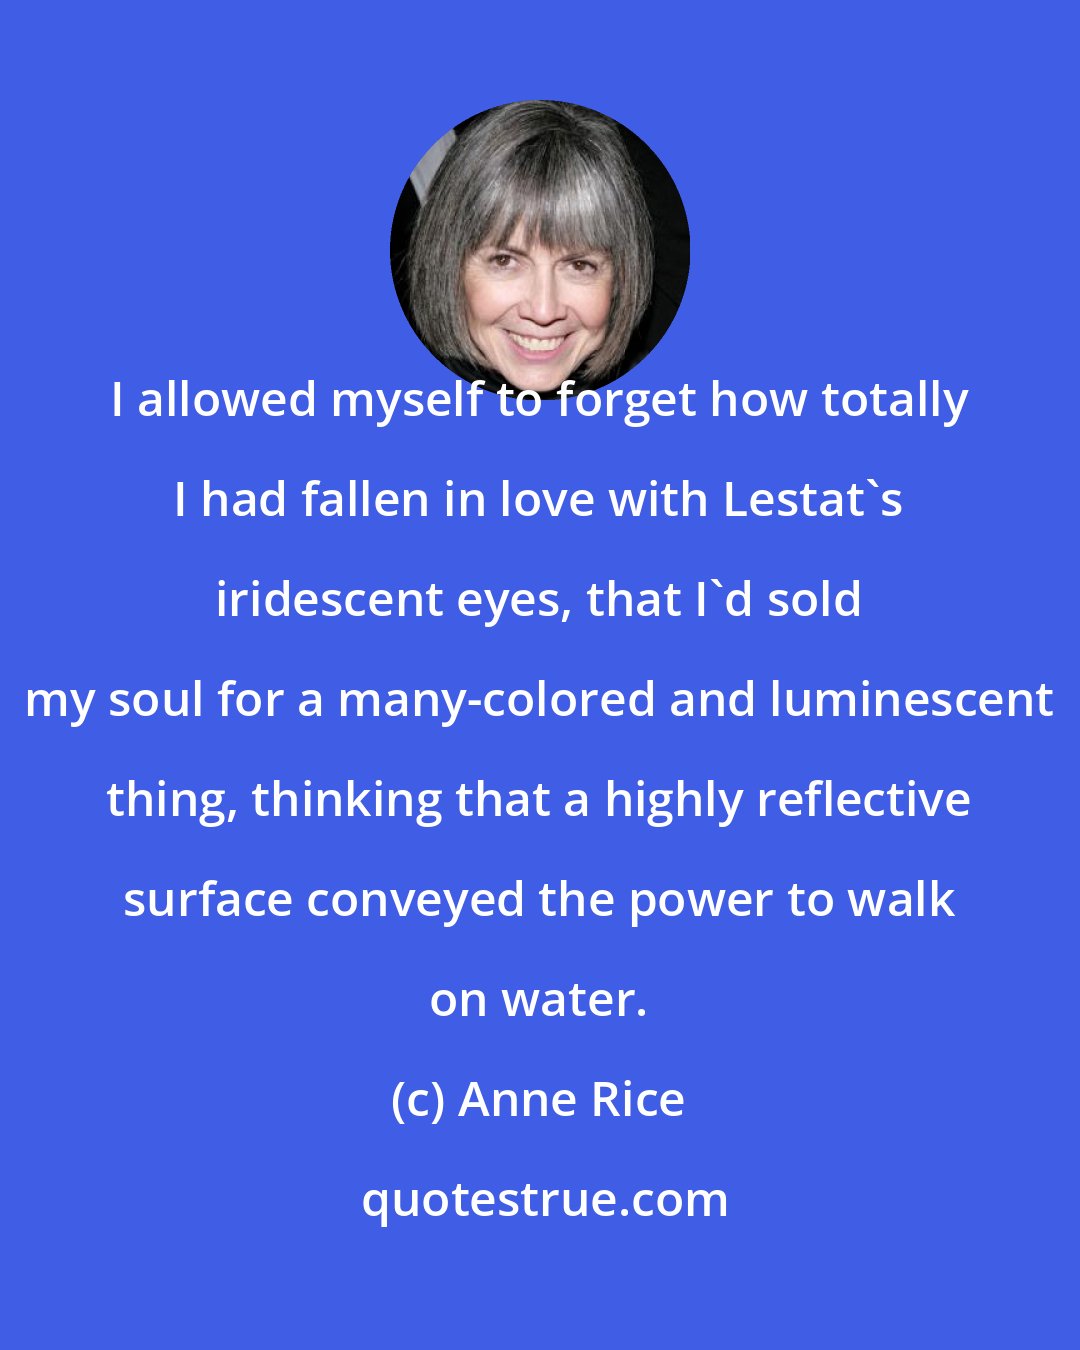 Anne Rice: I allowed myself to forget how totally I had fallen in love with Lestat's iridescent eyes, that I'd sold my soul for a many-colored and luminescent thing, thinking that a highly reflective surface conveyed the power to walk on water.